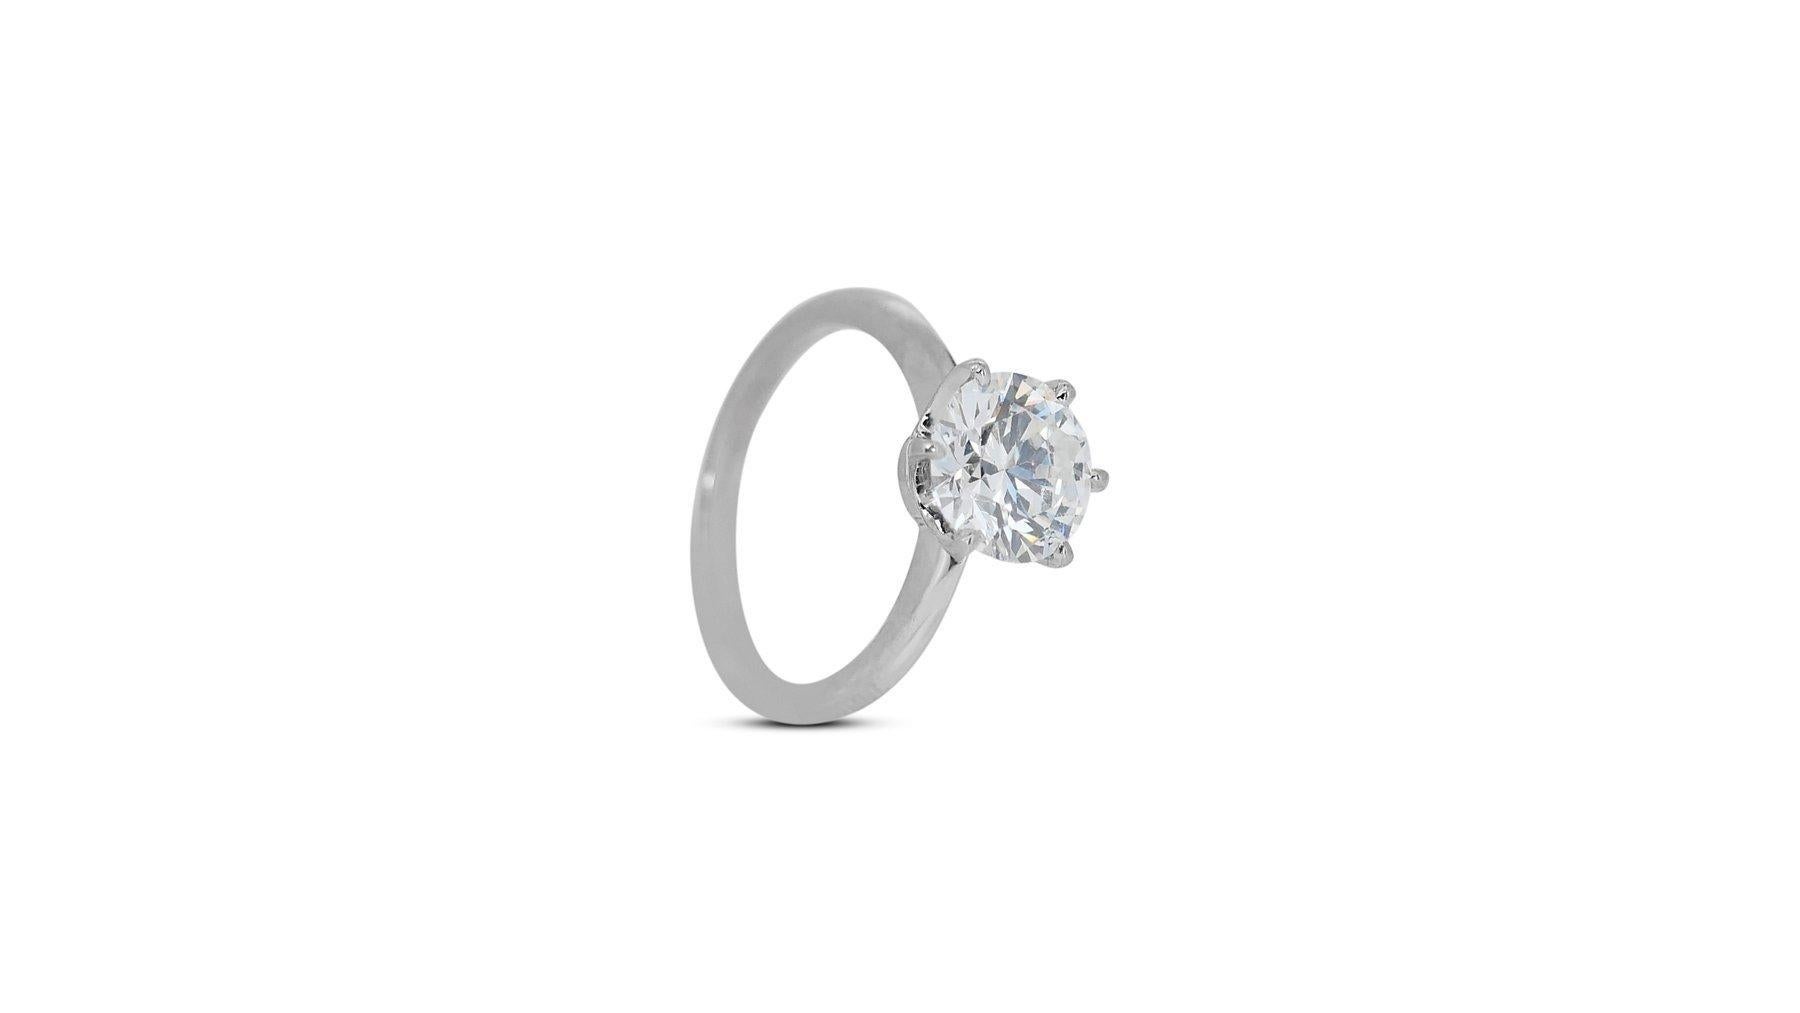 Round Cut Timeless 3.09ct Diamond Solitaire Ring in 18k White Gold - GIA Certified For Sale